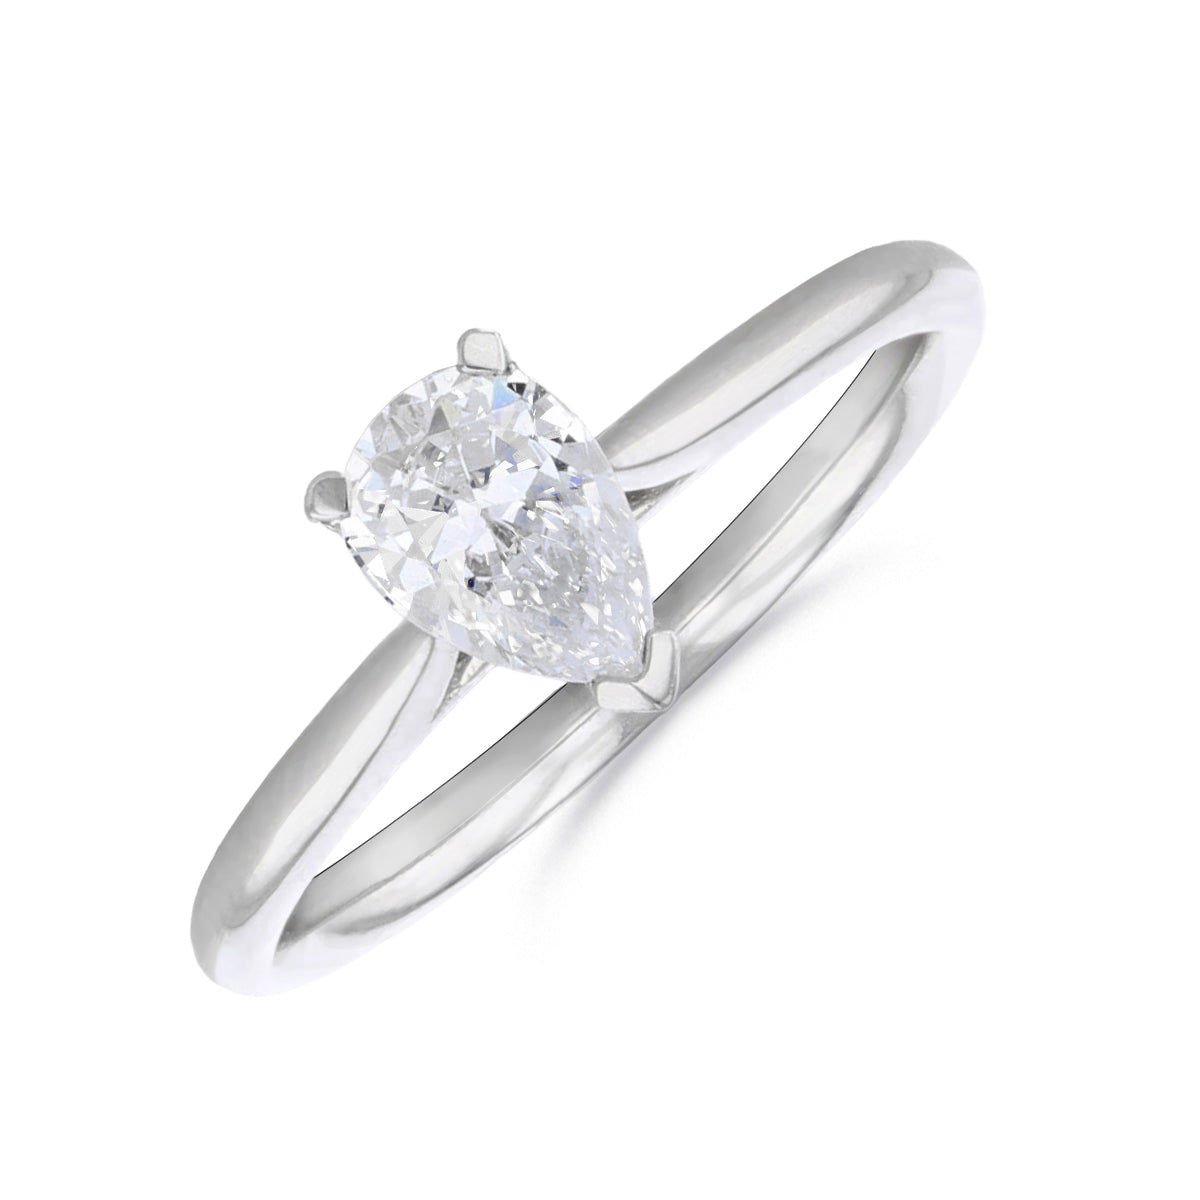 2.00ct Ophelia Pear Cut Diamond Solitaire Engagement Ring | 18ct White Gold